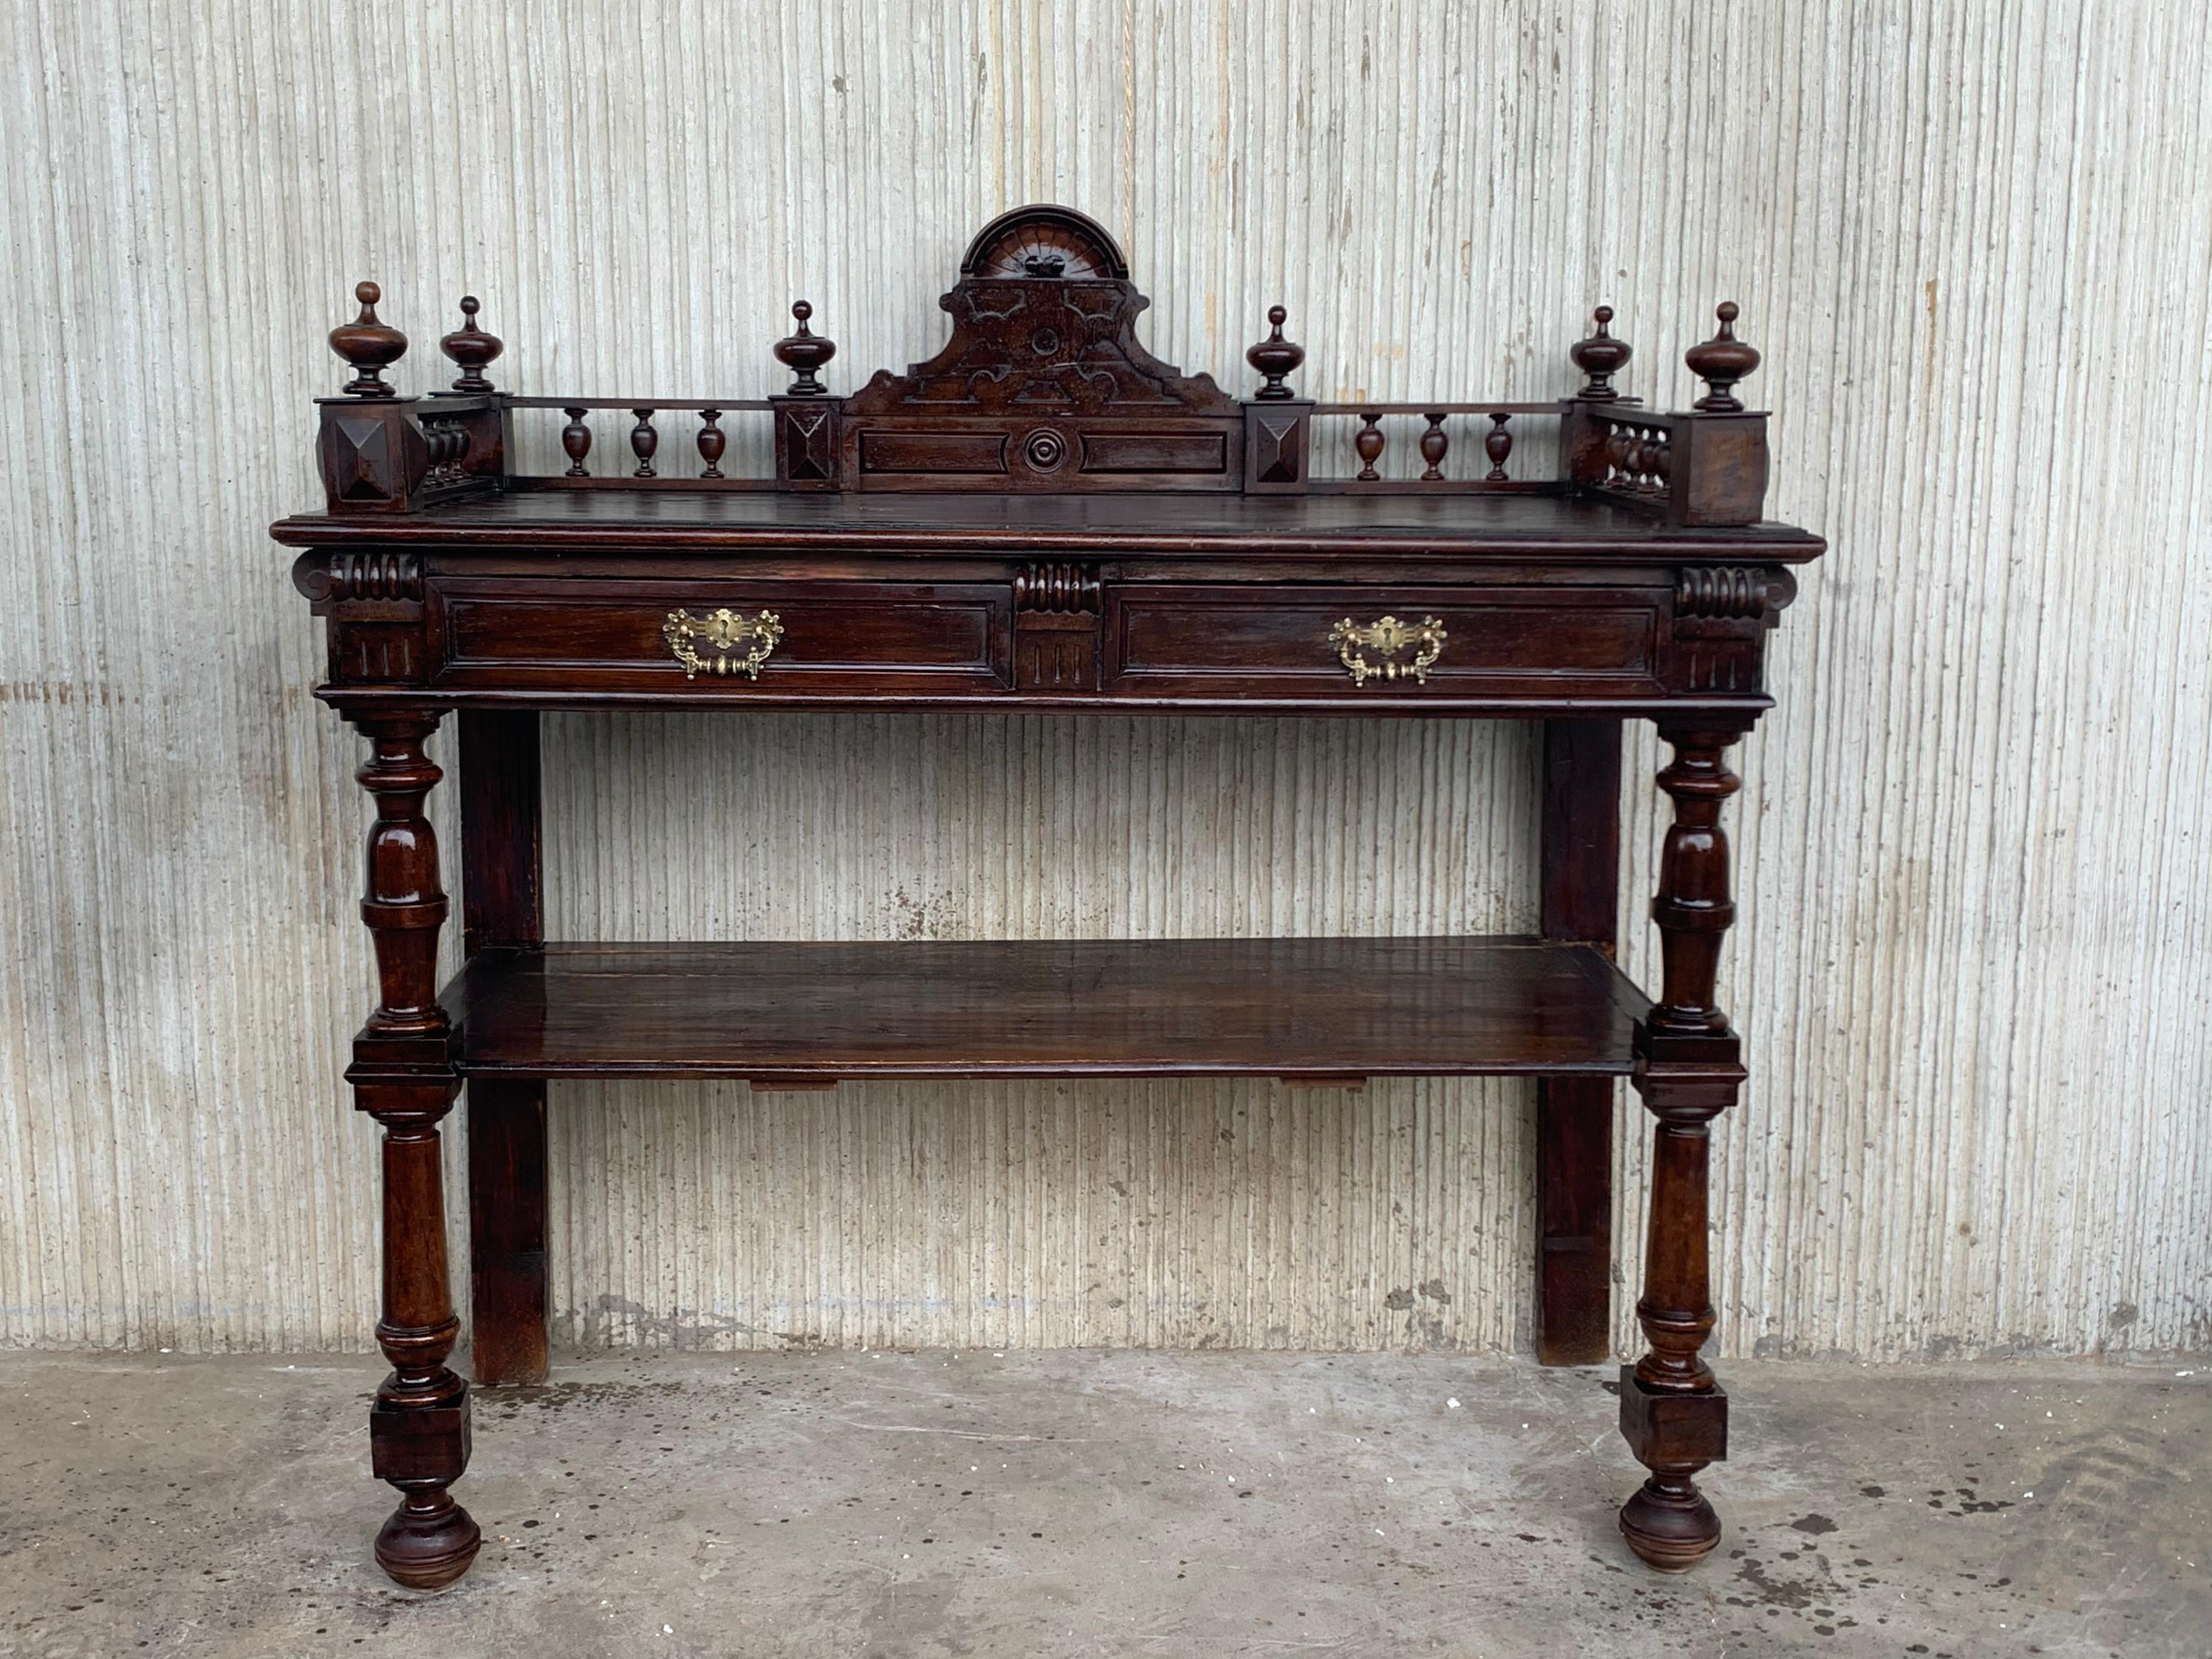 Antique serving table, Victorian carved walnut console table or hall table, antique furniture, France, 1890 .
Finish carved panel back with plate rail on top rectangular top with moulded edge Slant front with two drawers and original brass hardware